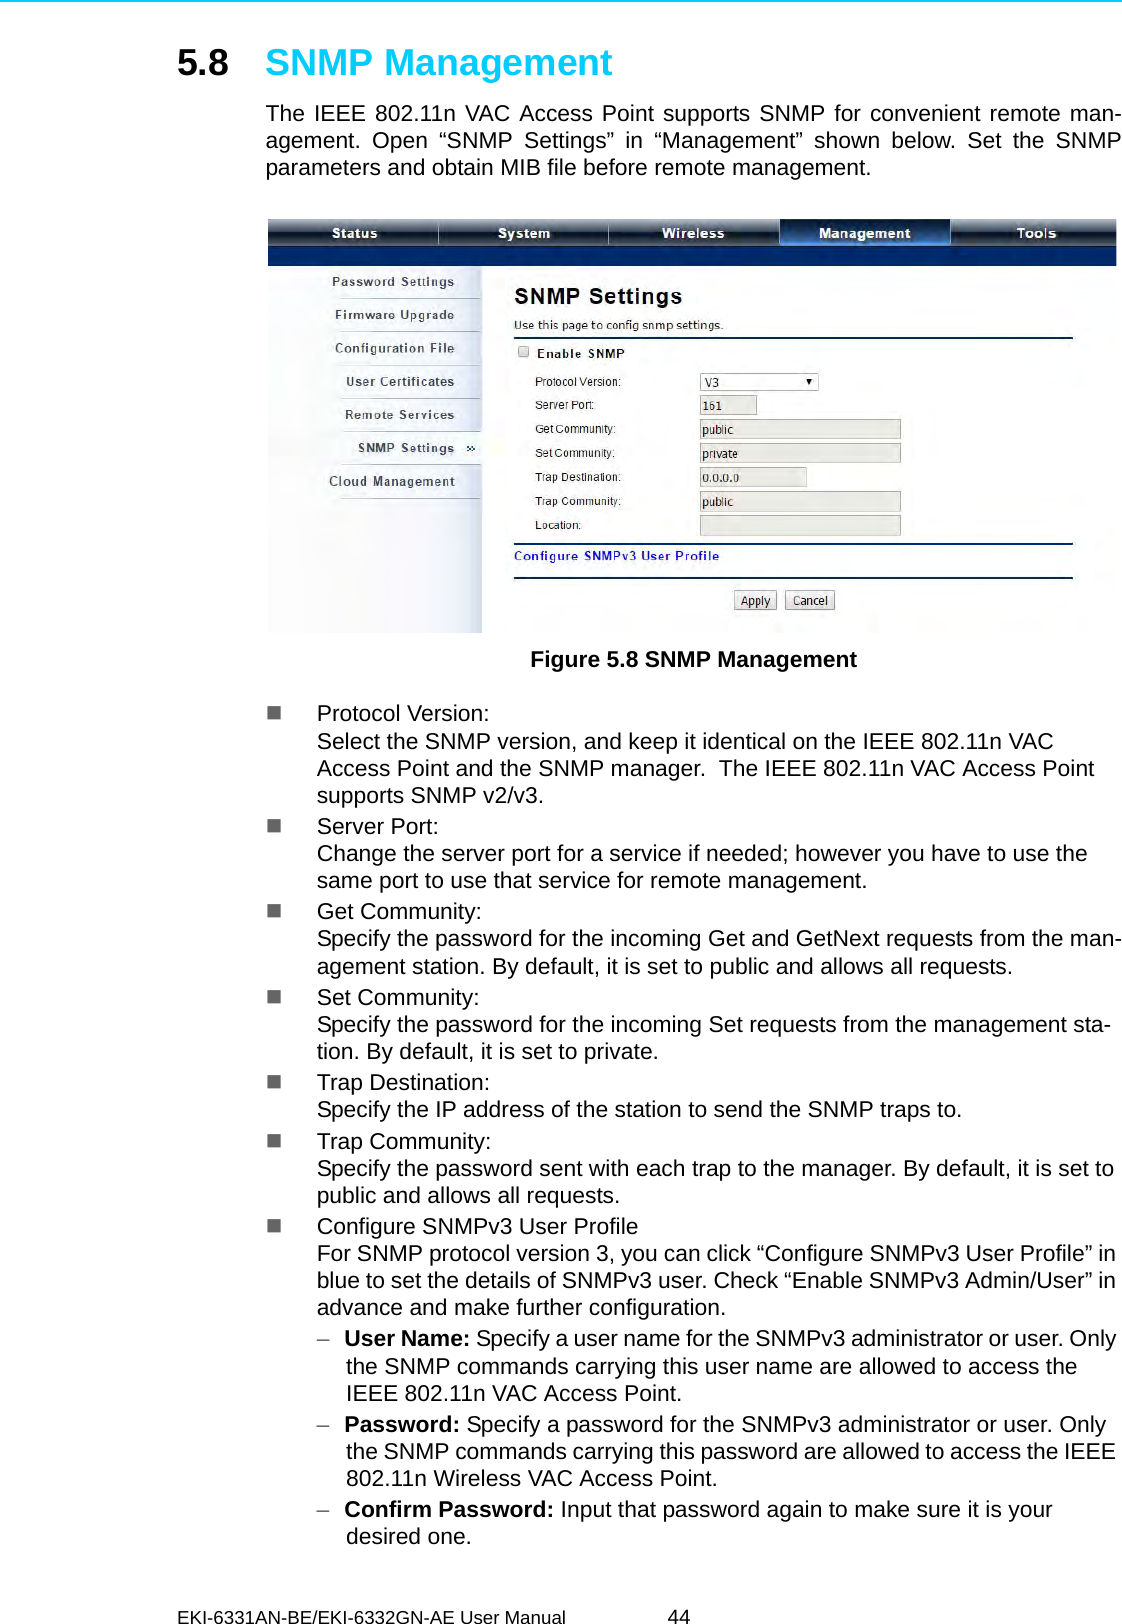 EKI-6331AN-BE/EKI-6332GN-AE User Manual 445.8 SNMP ManagementThe IEEE 802.11n VAC Access Point supports SNMP for convenient remote man-agement. Open “SNMP Settings” in “Management” shown below. Set the SNMPparameters and obtain MIB file before remote management. Figure 5.8 SNMP ManagementProtocol Version: Select the SNMP version, and keep it identical on the IEEE 802.11n VAC Access Point and the SNMP manager.  The IEEE 802.11n VAC Access Point supports SNMP v2/v3.Server Port: Change the server port for a service if needed; however you have to use the same port to use that service for remote management.Get Community: Specify the password for the incoming Get and GetNext requests from the man-agement station. By default, it is set to public and allows all requests.Set Community: Specify the password for the incoming Set requests from the management sta-tion. By default, it is set to private.Trap Destination: Specify the IP address of the station to send the SNMP traps to.Trap Community: Specify the password sent with each trap to the manager. By default, it is set to public and allows all requests.Configure SNMPv3 User ProfileFor SNMP protocol version 3, you can click “Configure SNMPv3 User Profile” in blue to set the details of SNMPv3 user. Check “Enable SNMPv3 Admin/User” in advance and make further configuration.–User Name: Specify a user name for the SNMPv3 administrator or user. Only the SNMP commands carrying this user name are allowed to access the IEEE 802.11n VAC Access Point.–Password: Specify a password for the SNMPv3 administrator or user. Only the SNMP commands carrying this password are allowed to access the IEEE 802.11n Wireless VAC Access Point.–Confirm Password: Input that password again to make sure it is your desired one.